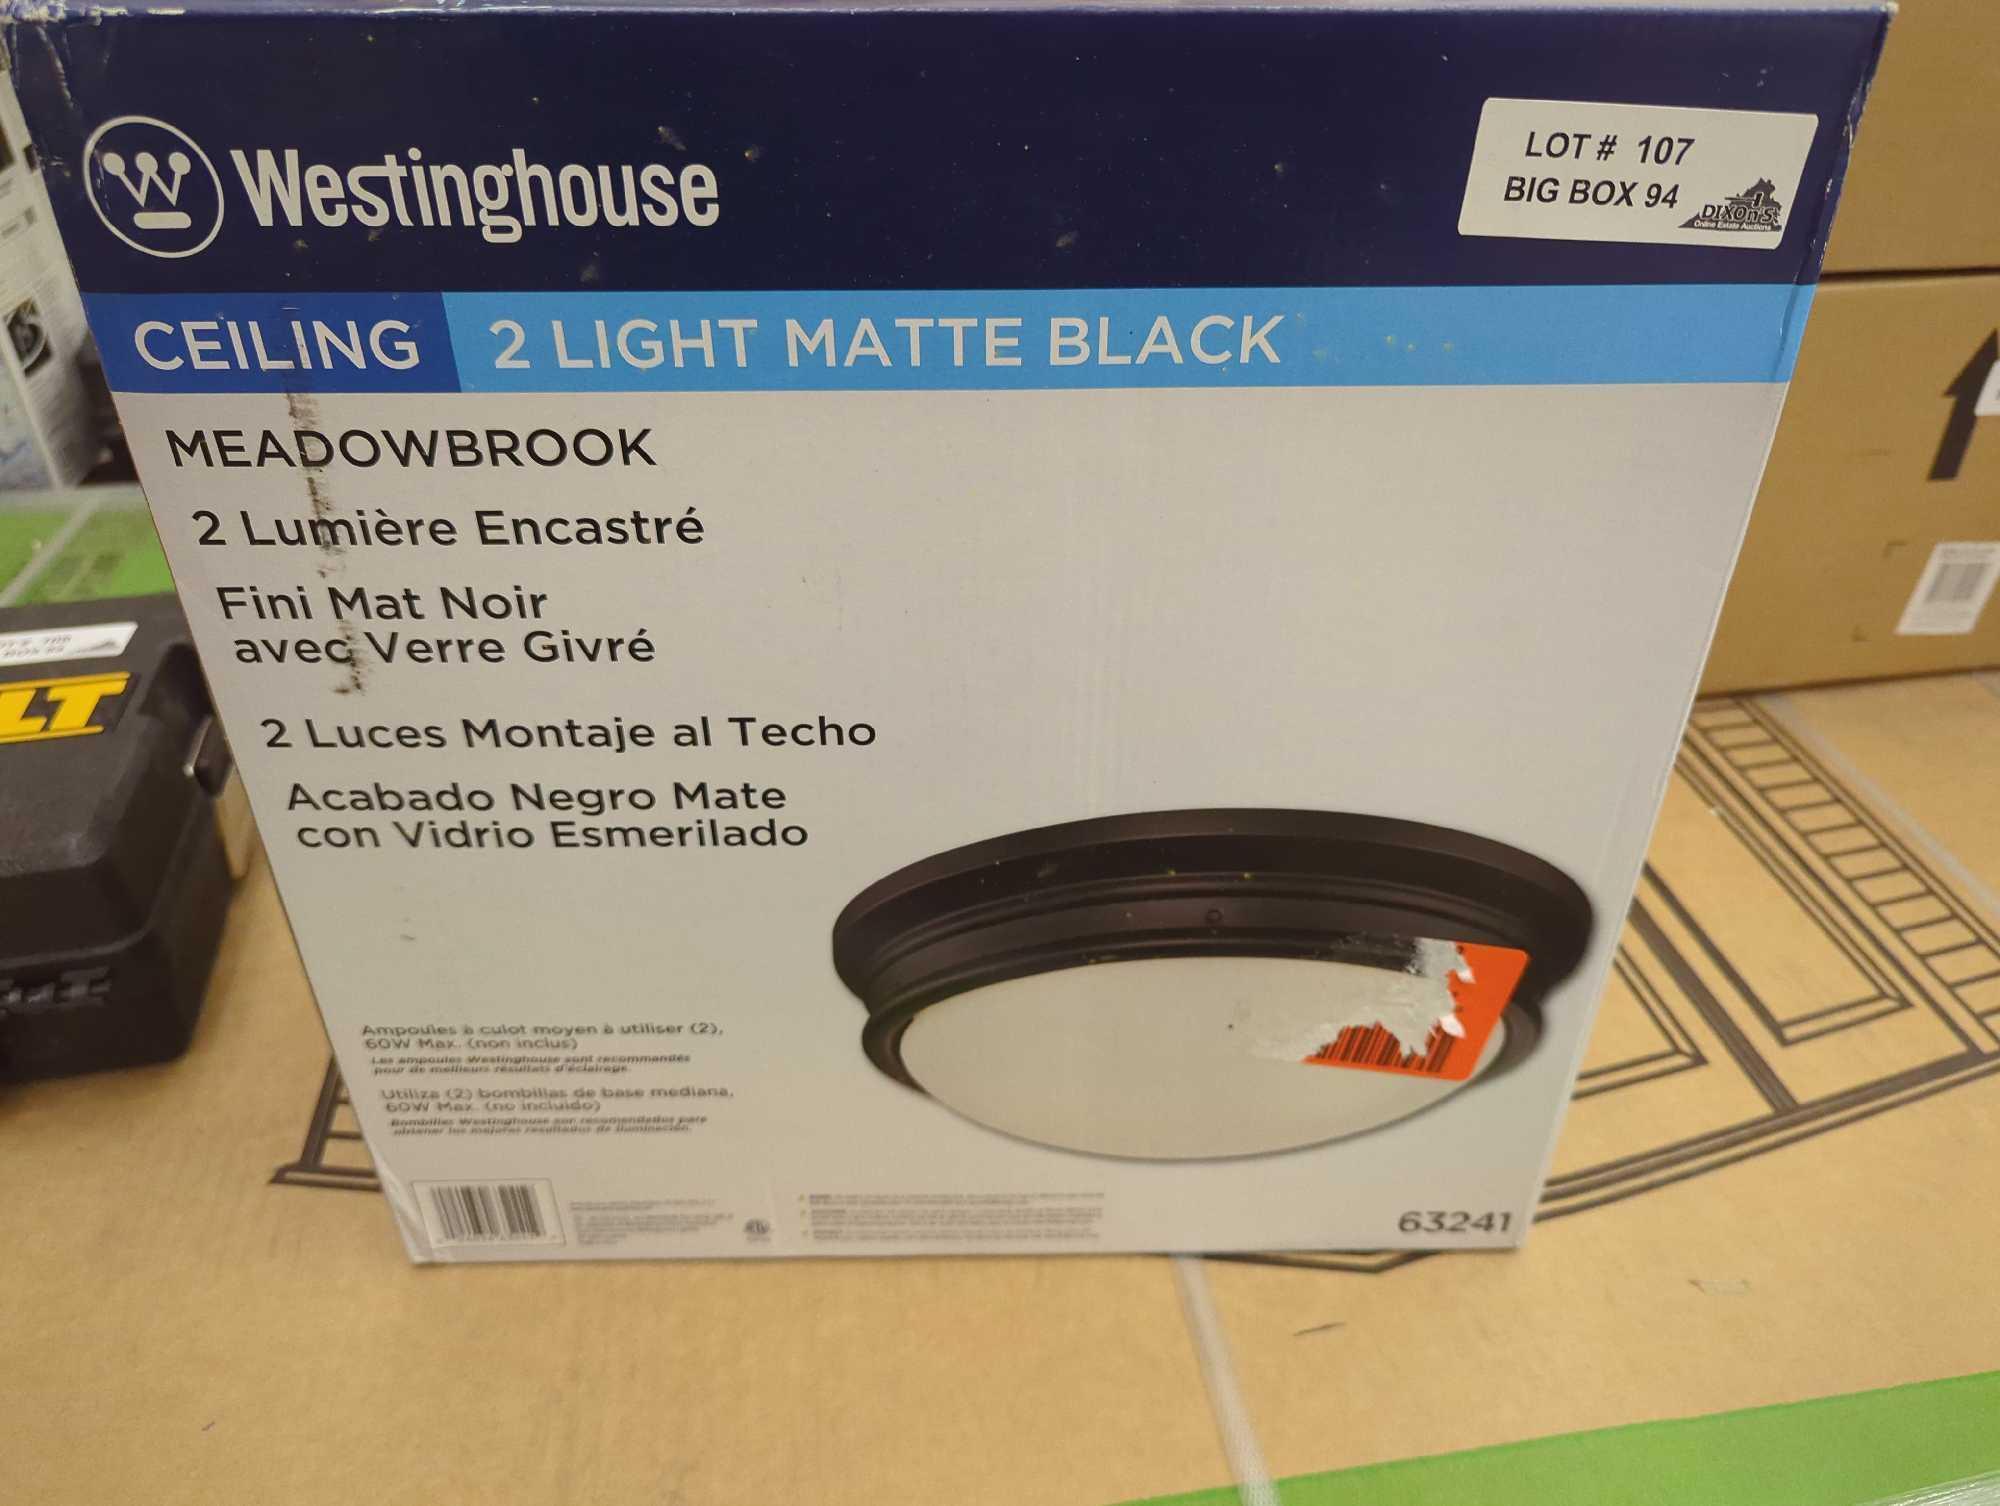 Westinghouse Meadowbrook 2-Light Matte Black Flush Mount, Appears to be New in Factory Sealed Box